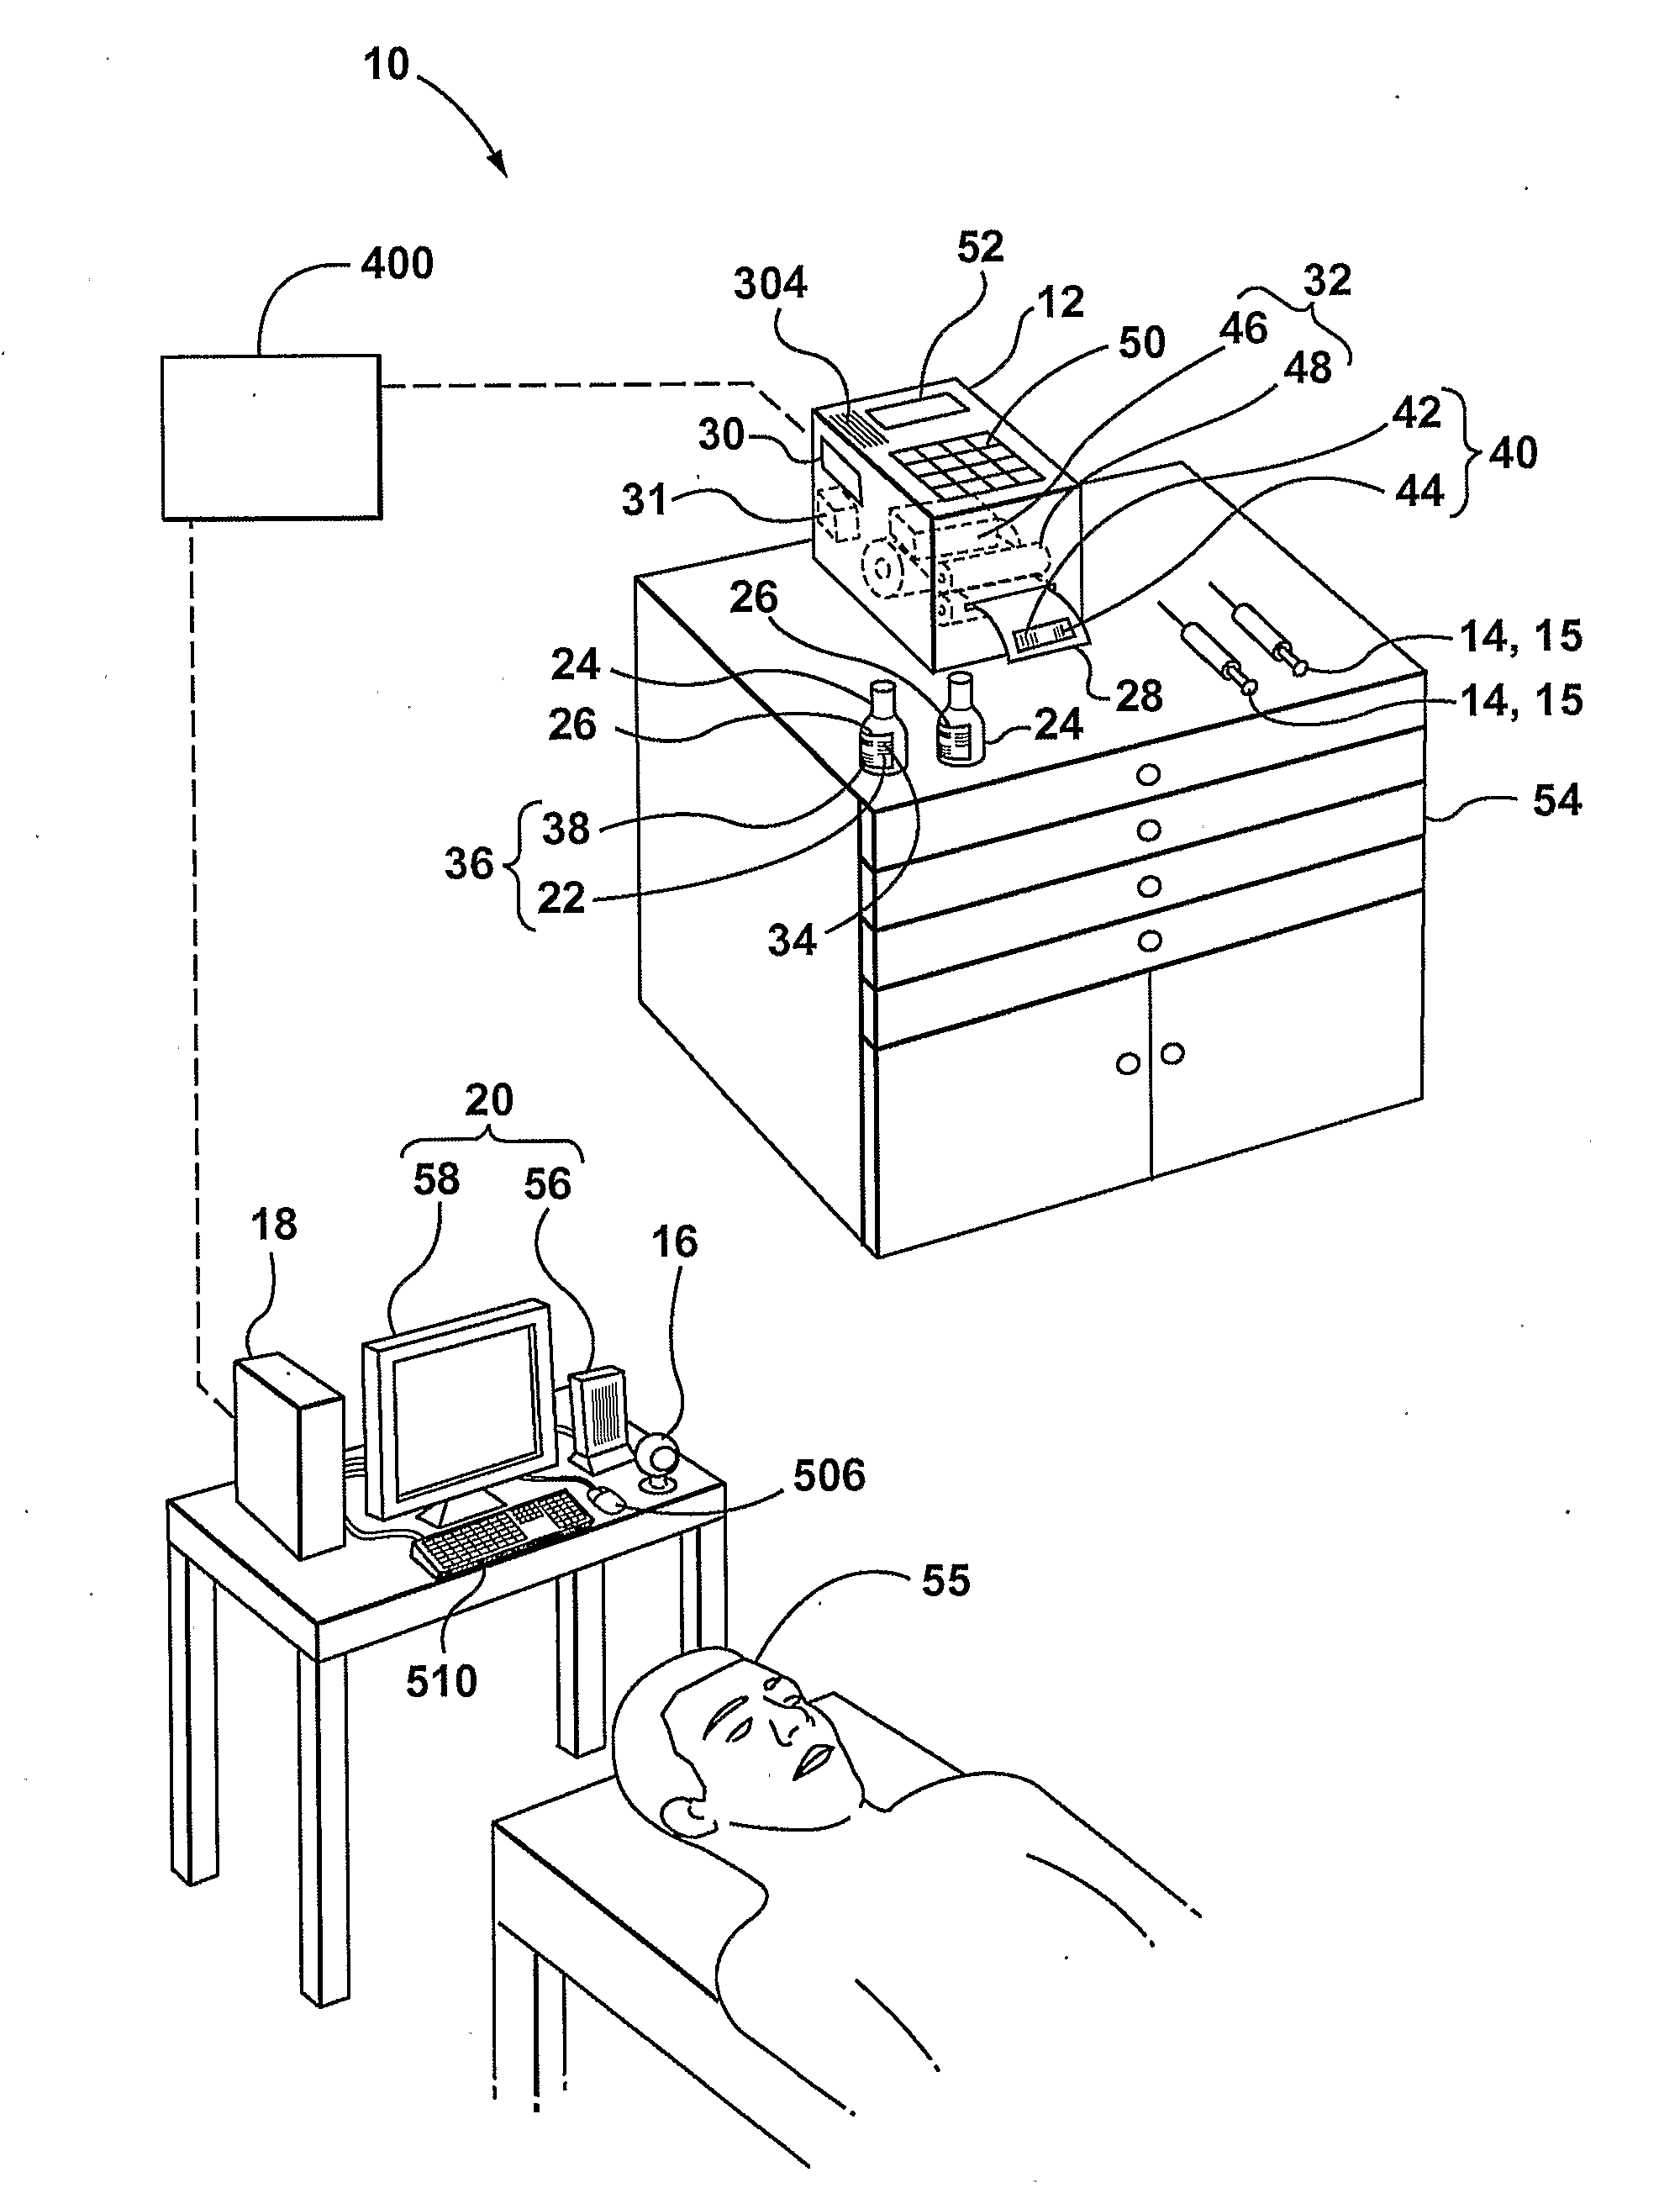 Apparatus, system and method for tracking drugs during a repackaging and administering process